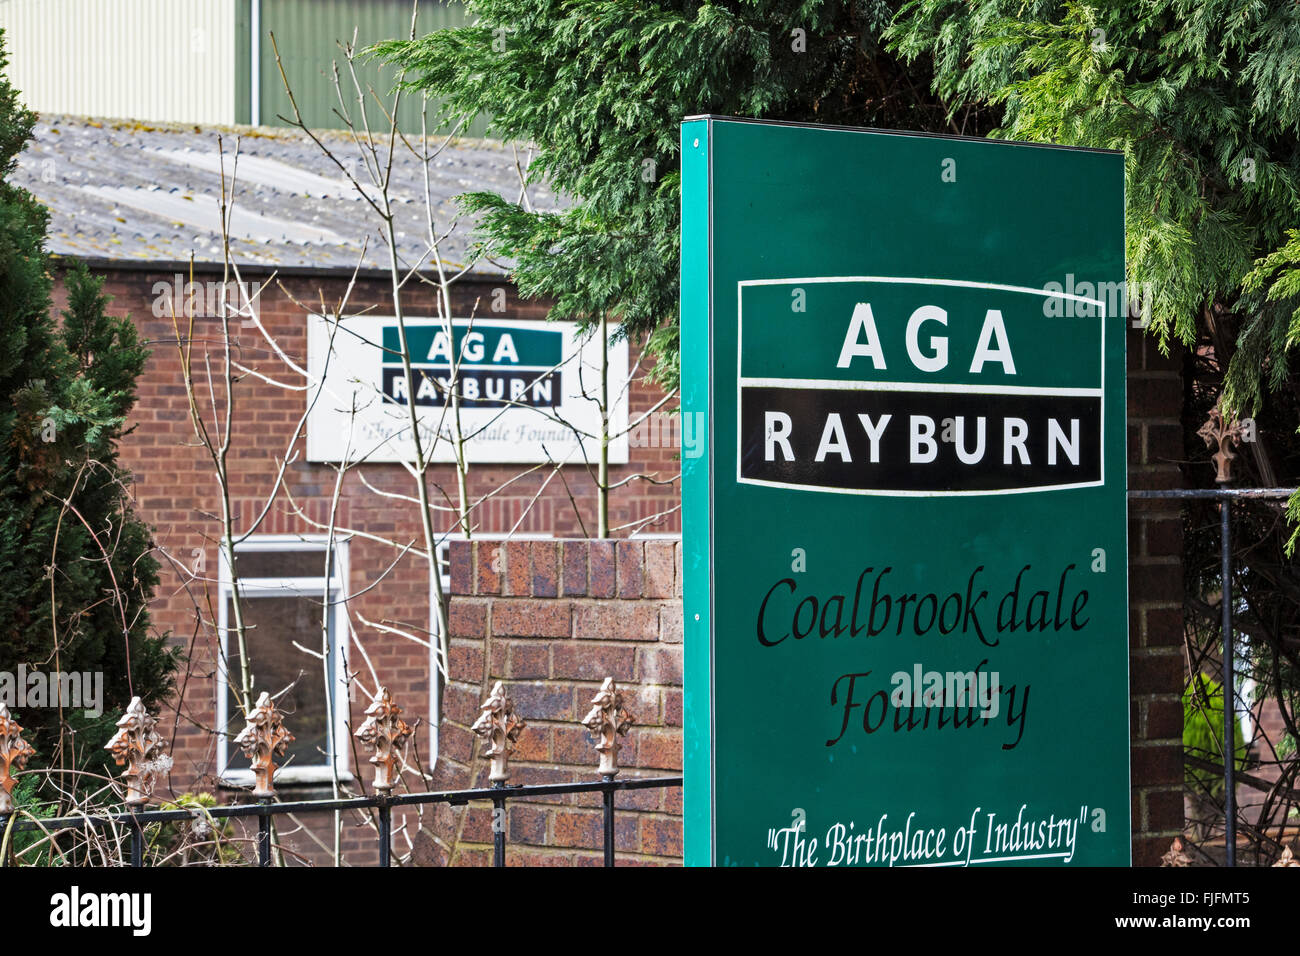 The Aga Rayburn foundry in Coalbrookdale, Shropshire, England, and is located in the Ironbridge Gorge World Heritage site. Stock Photo